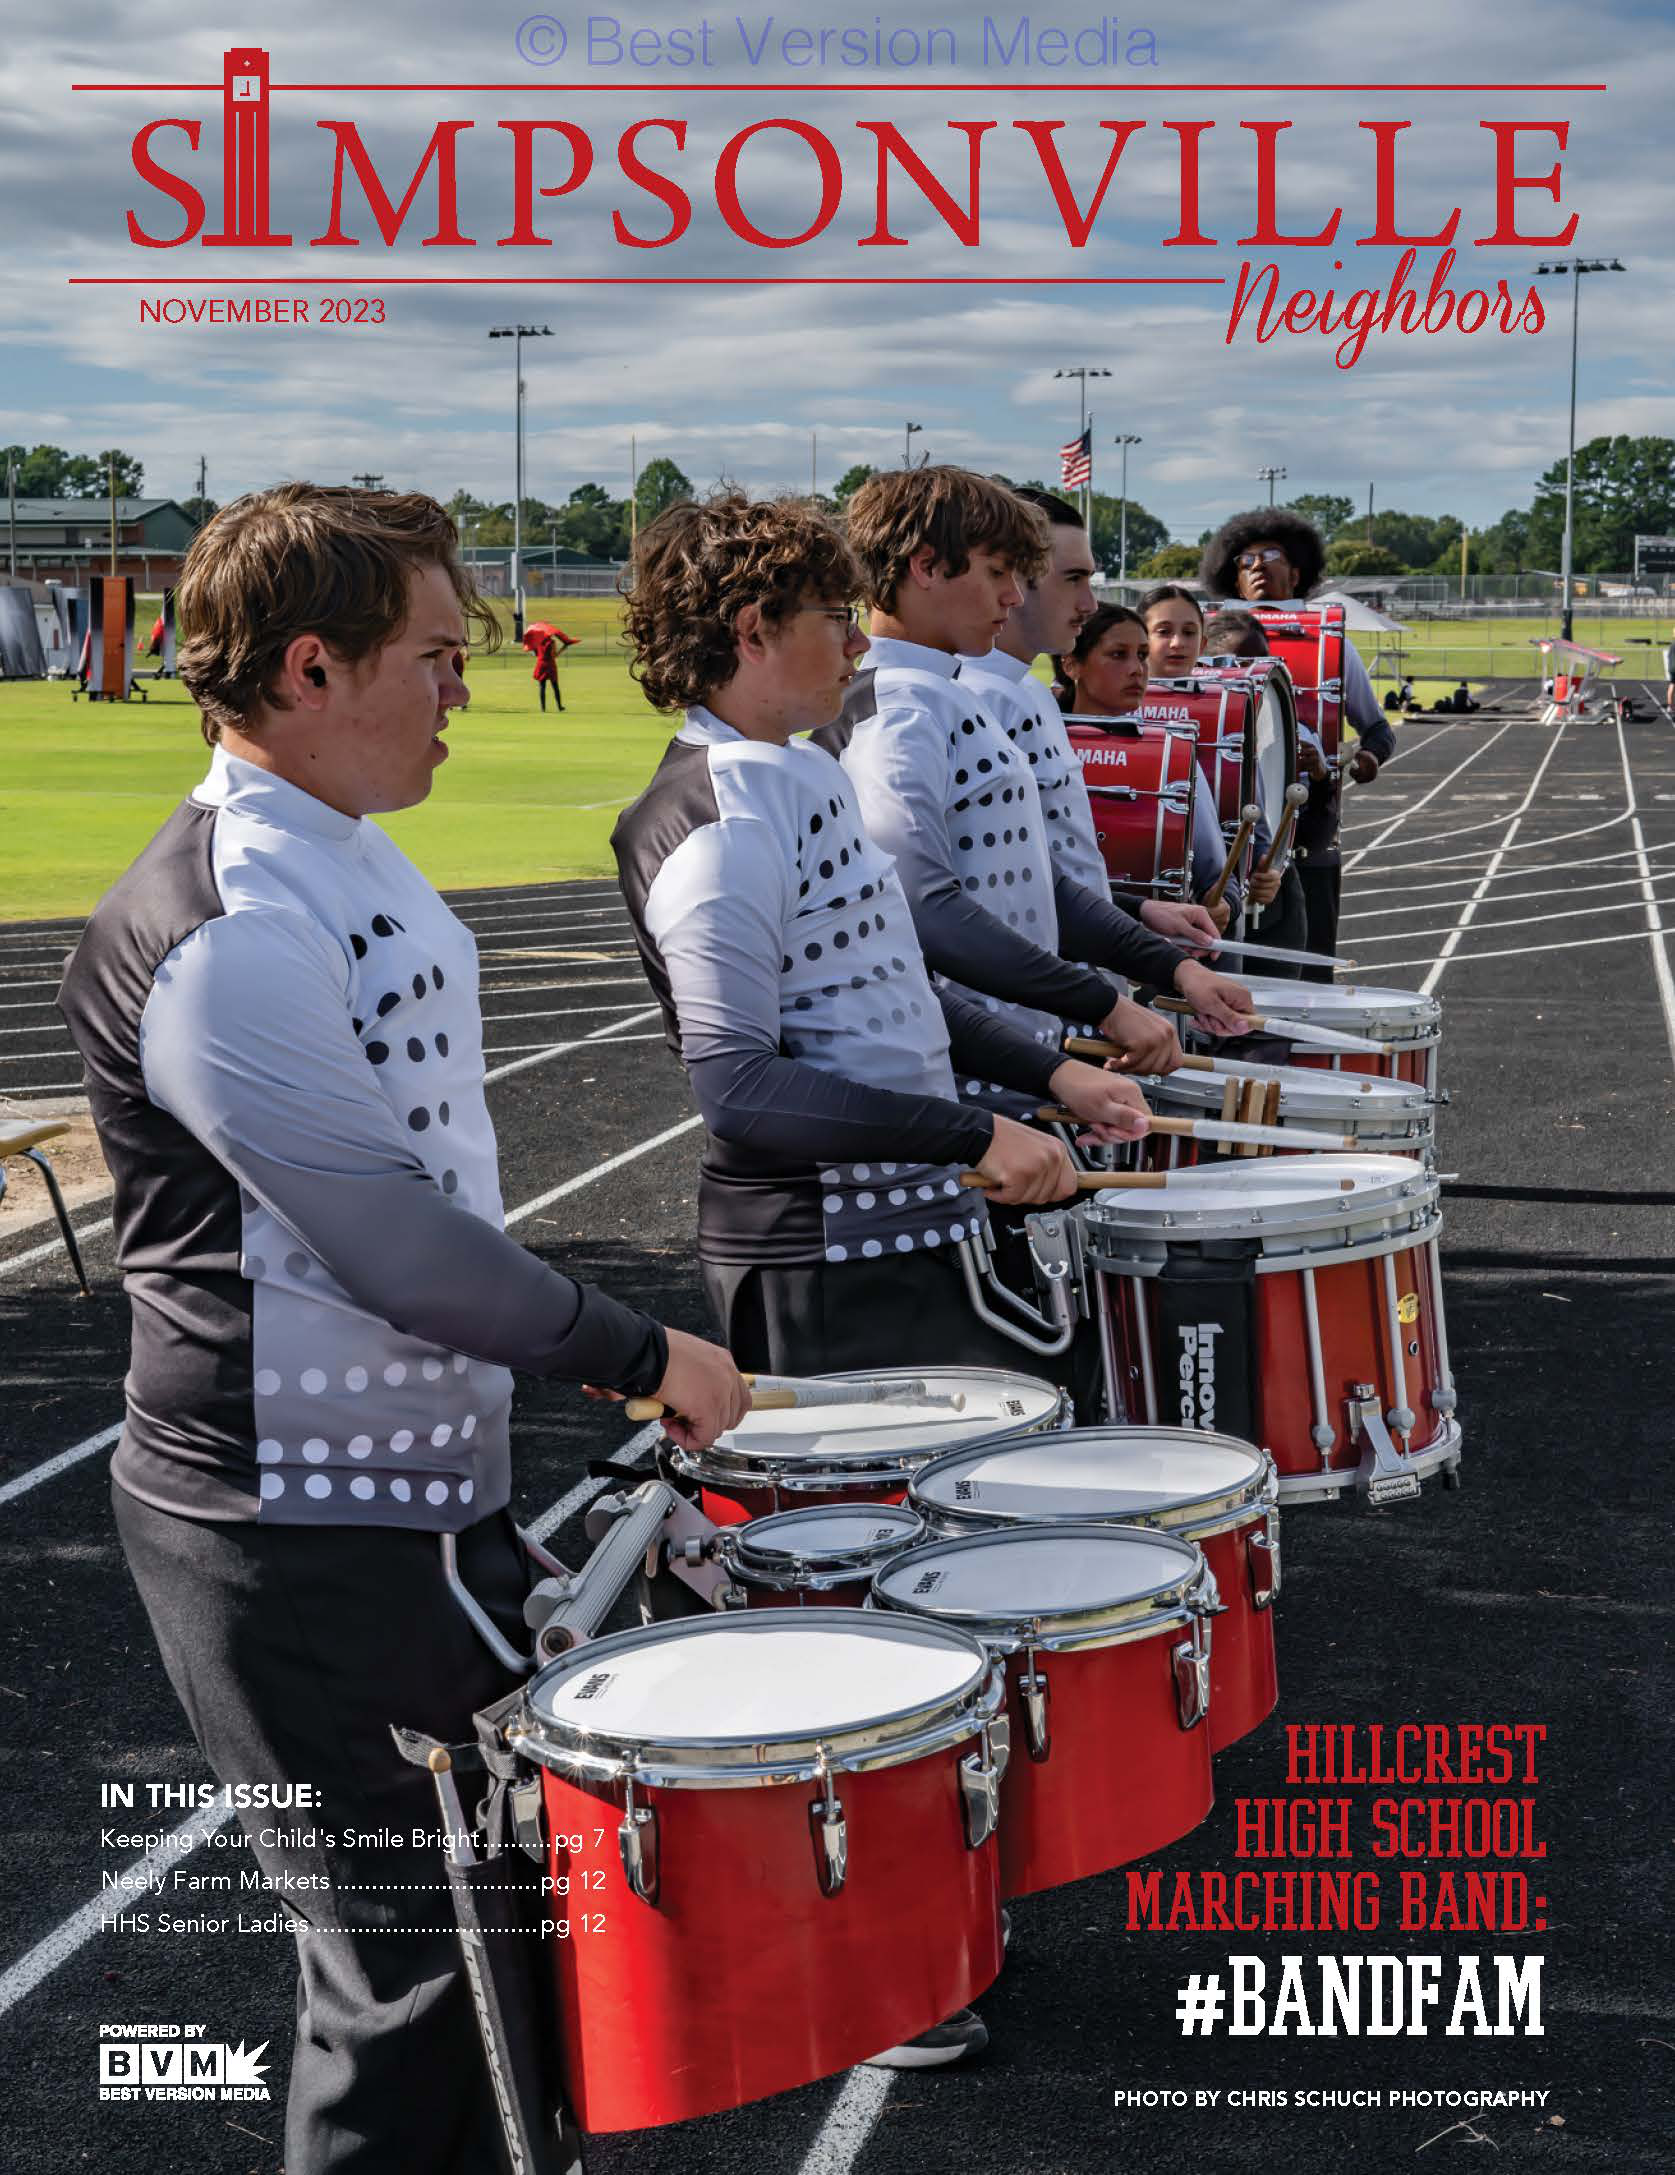 Image is the cover of a magazine with red writing. It includes band performers.